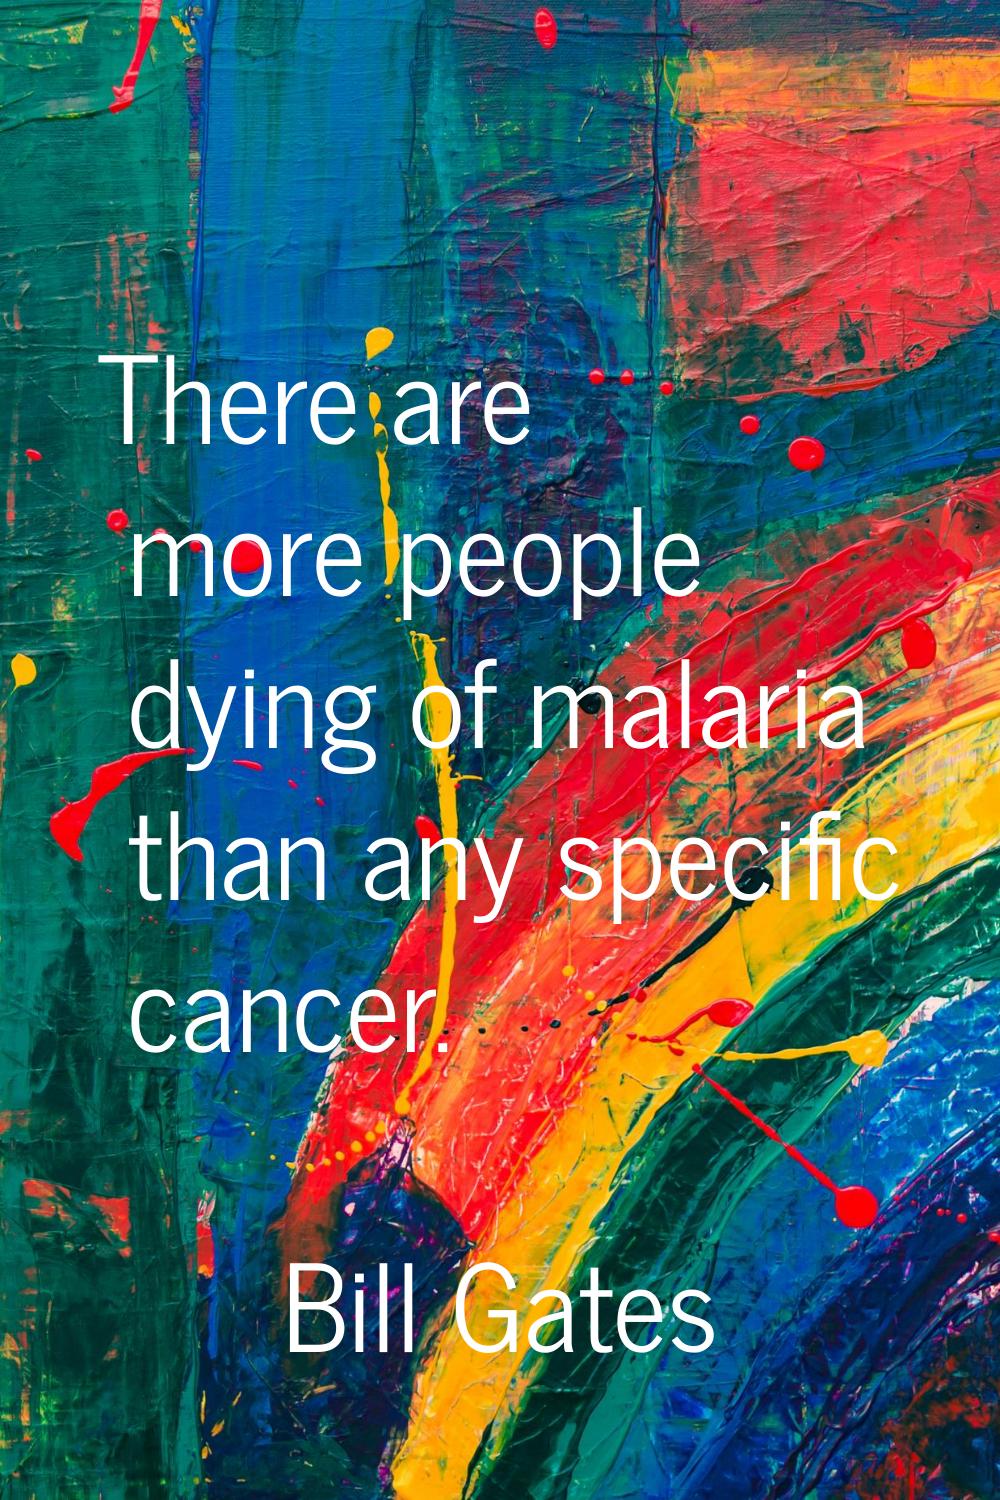 There are more people dying of malaria than any specific cancer.